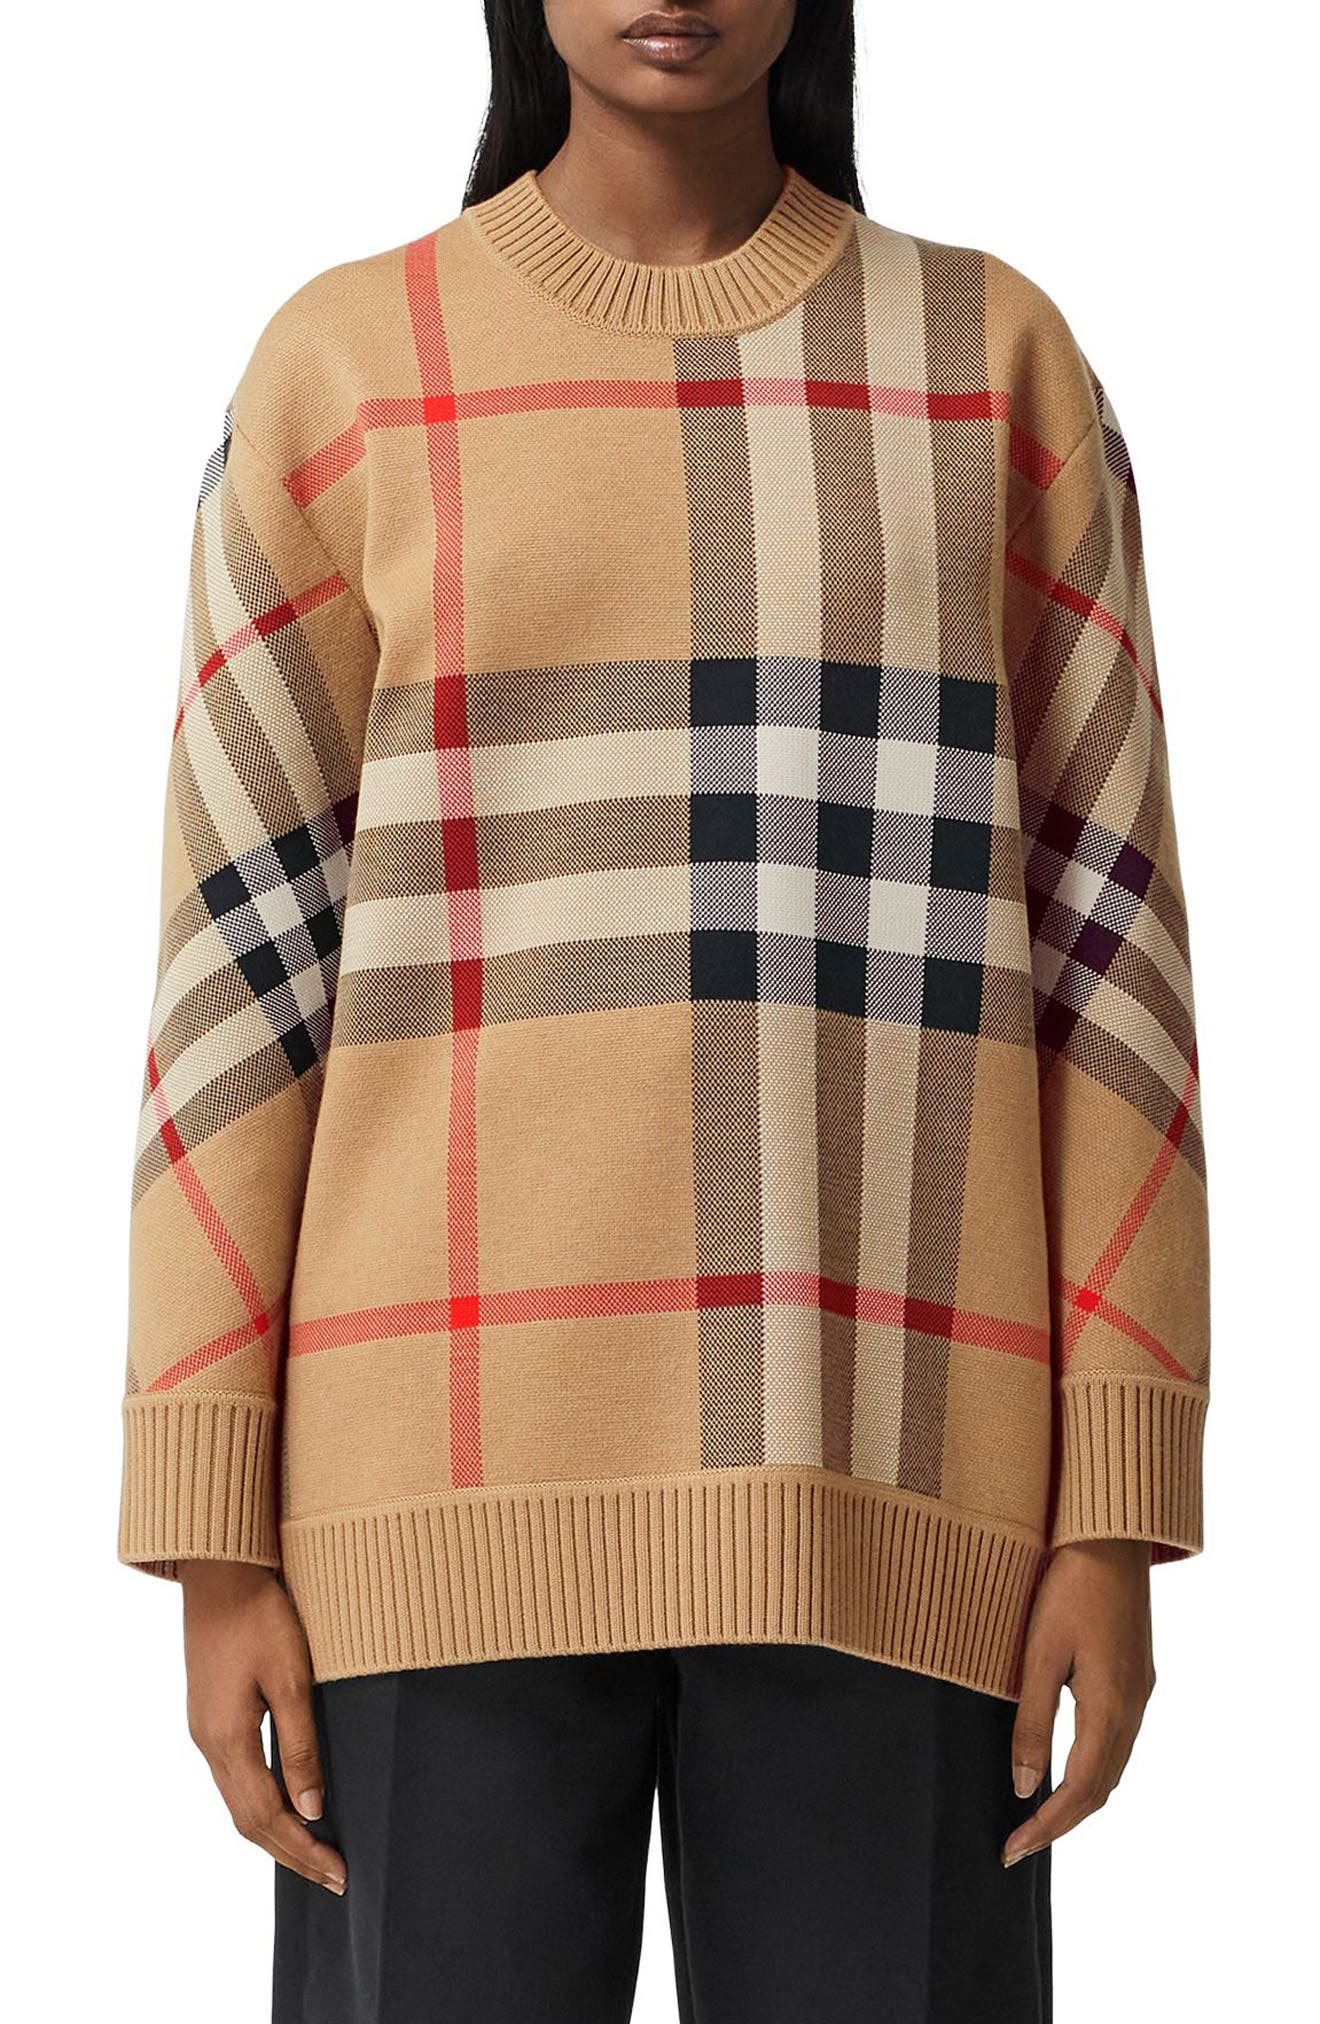 Burberry Calee Check Jacquard Sweater in Archive Beige at Nordstrom